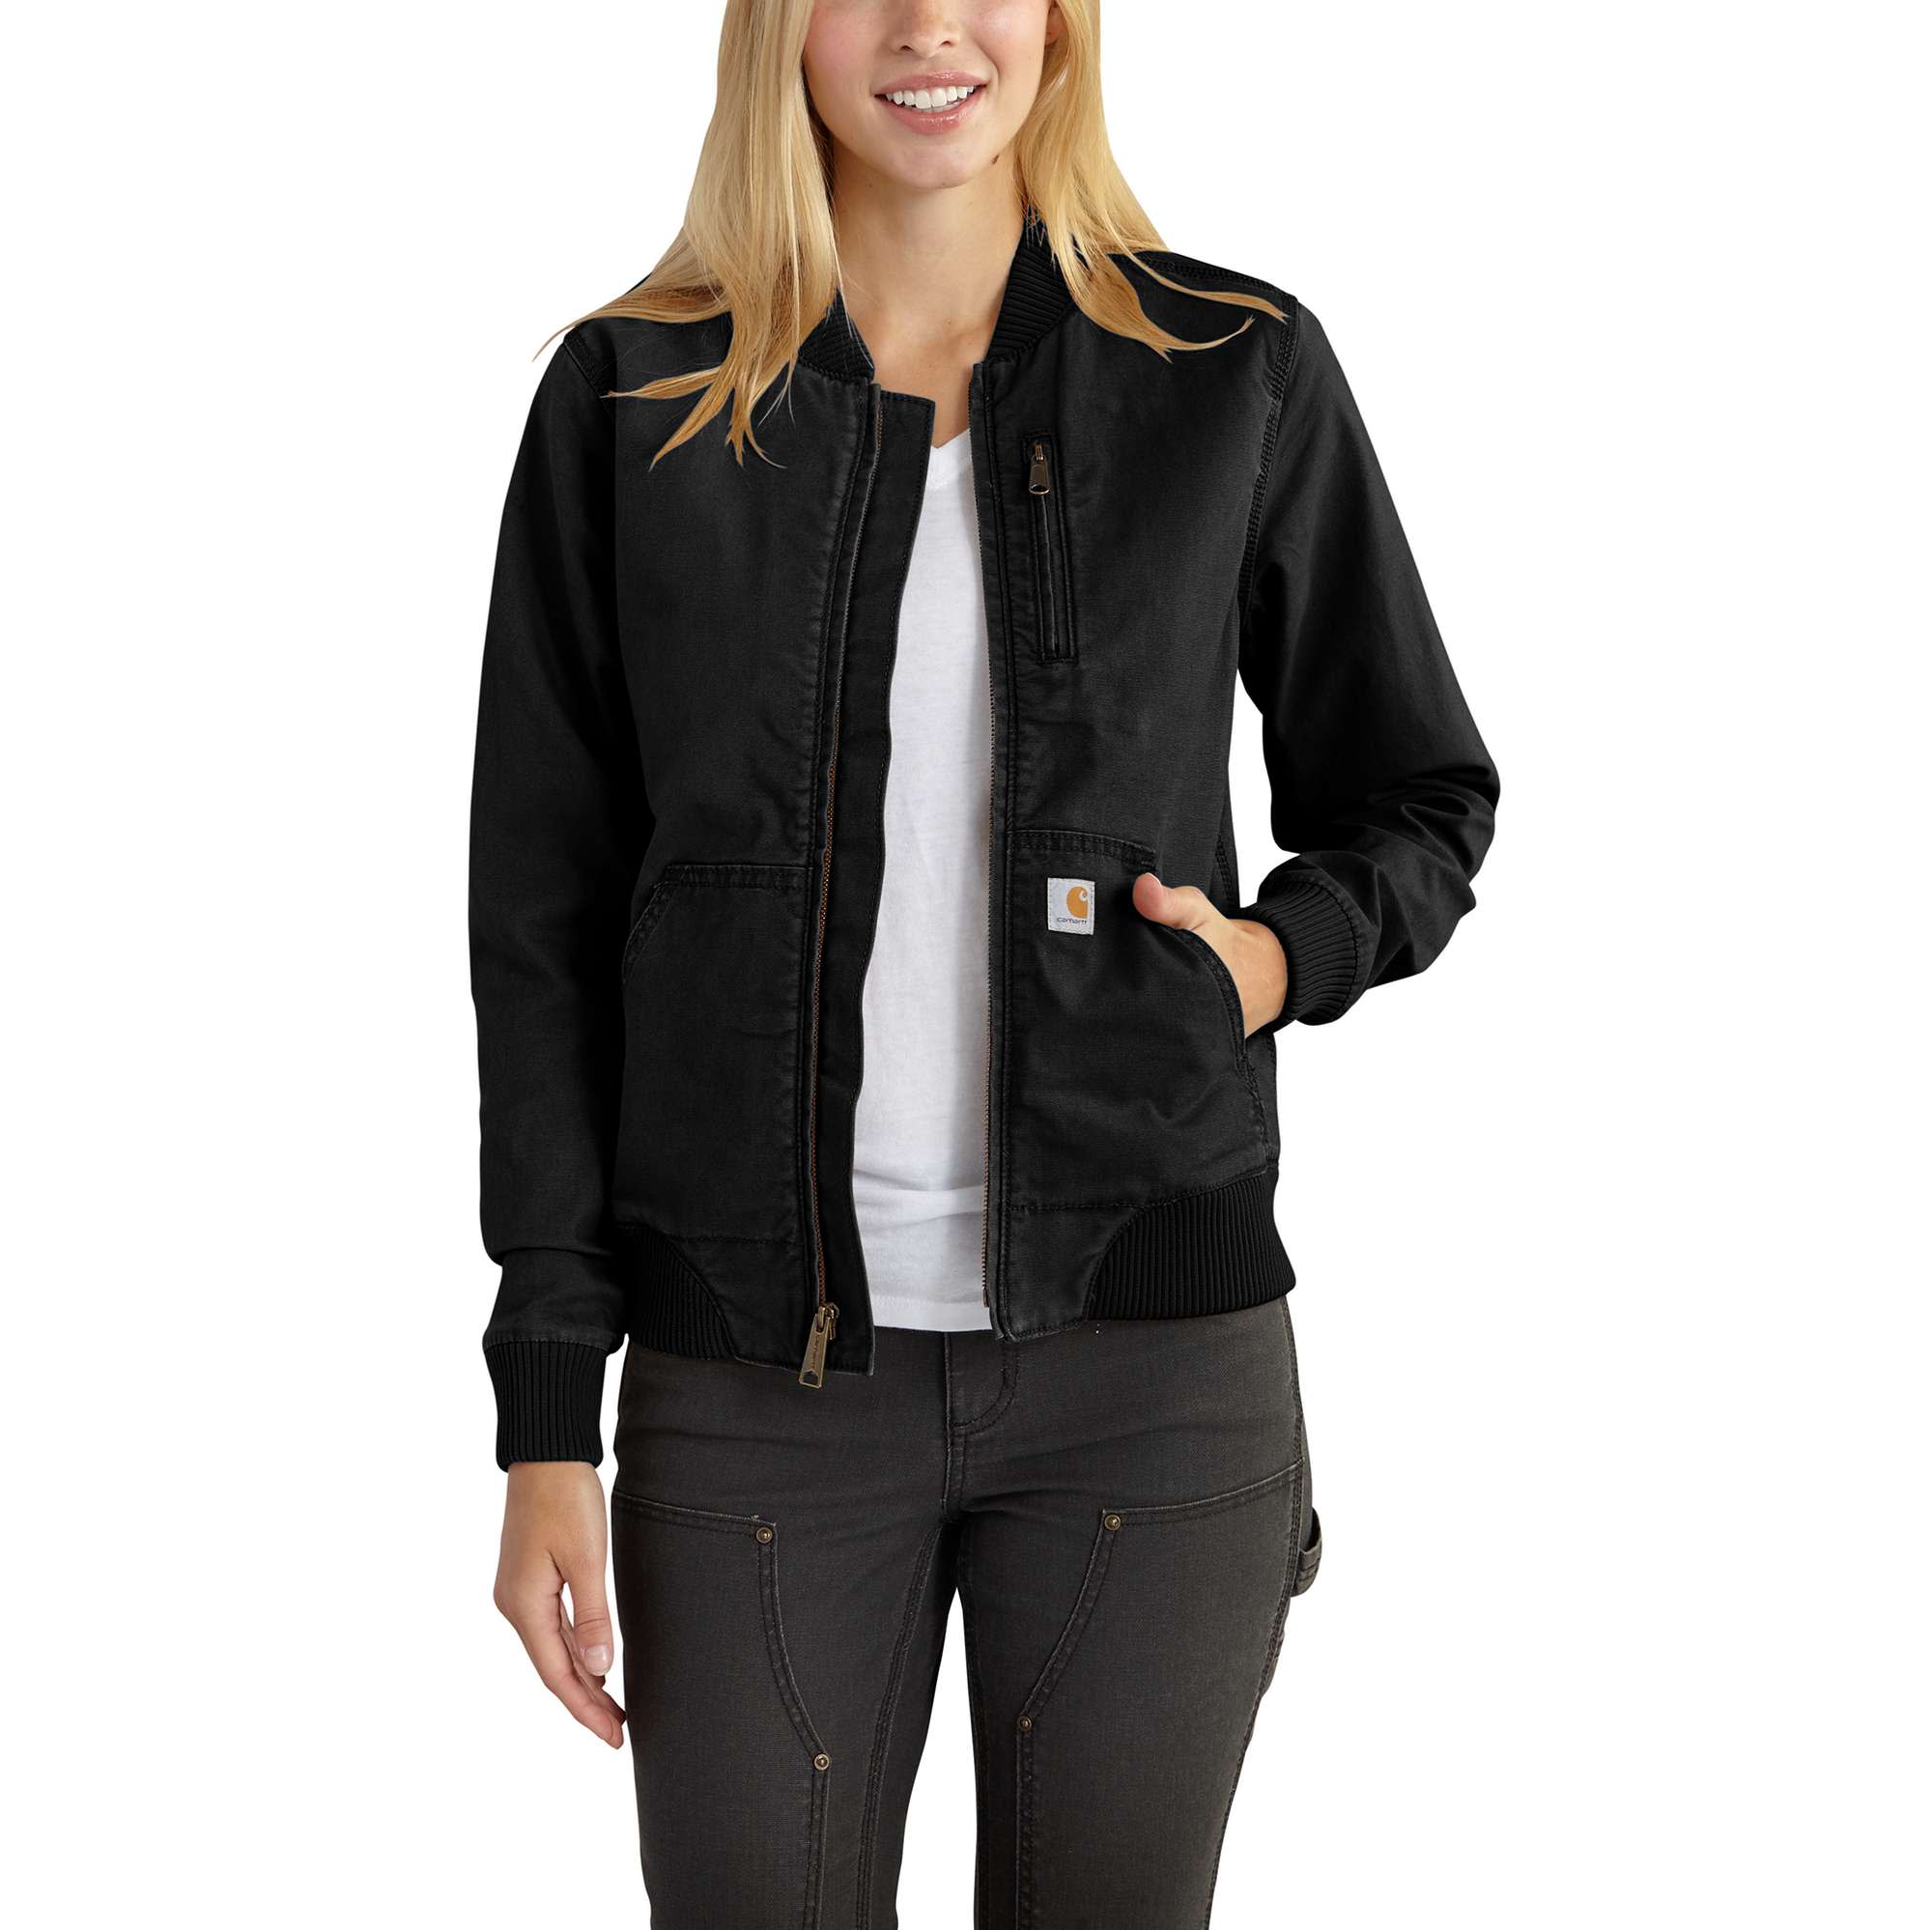 Carhartt - WOMEN'S RUGGED FLEX® RELAXED FIT CANVAS JACKET - STYLE #102